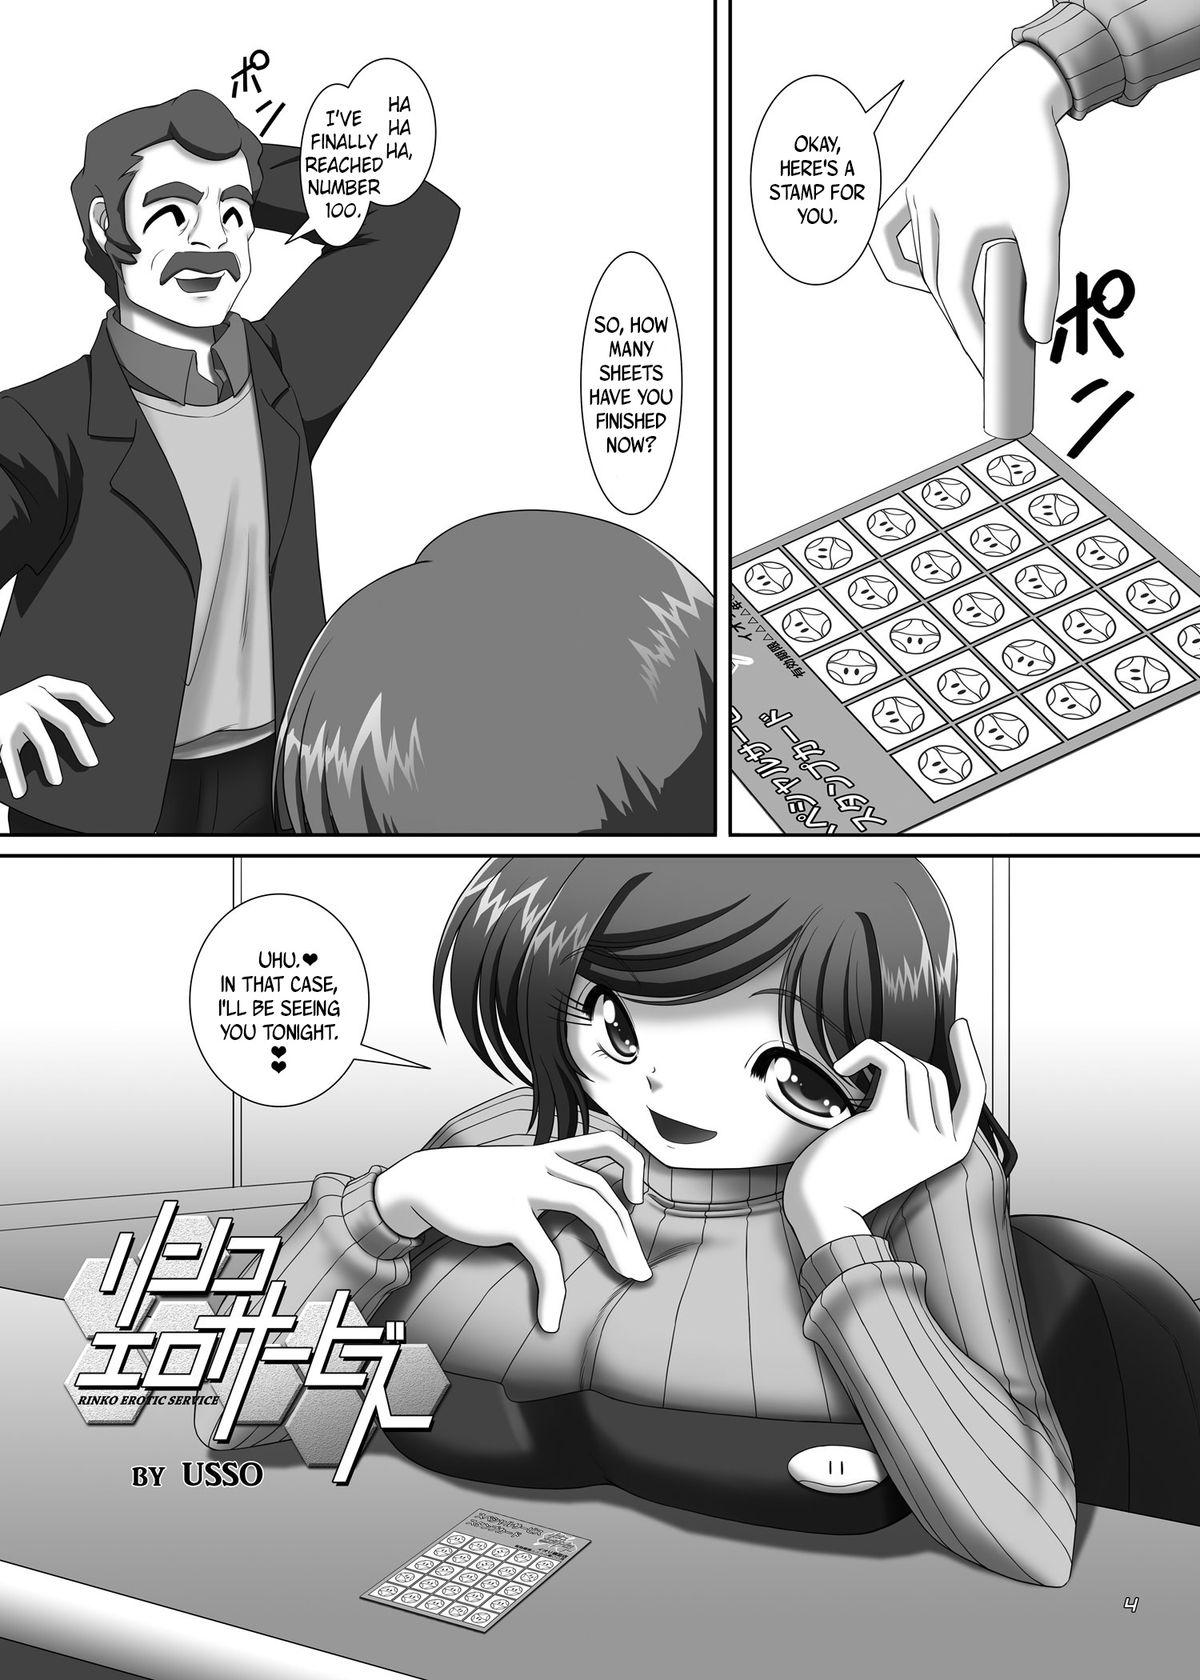 People Having Sex [KNOCKOUT (USSO)] Rinko Ero Service (Gundam Build Fighters) [English] =LWB=Funeral of Smiles= [Digital] - Gundam build fighters Slut - Page 3